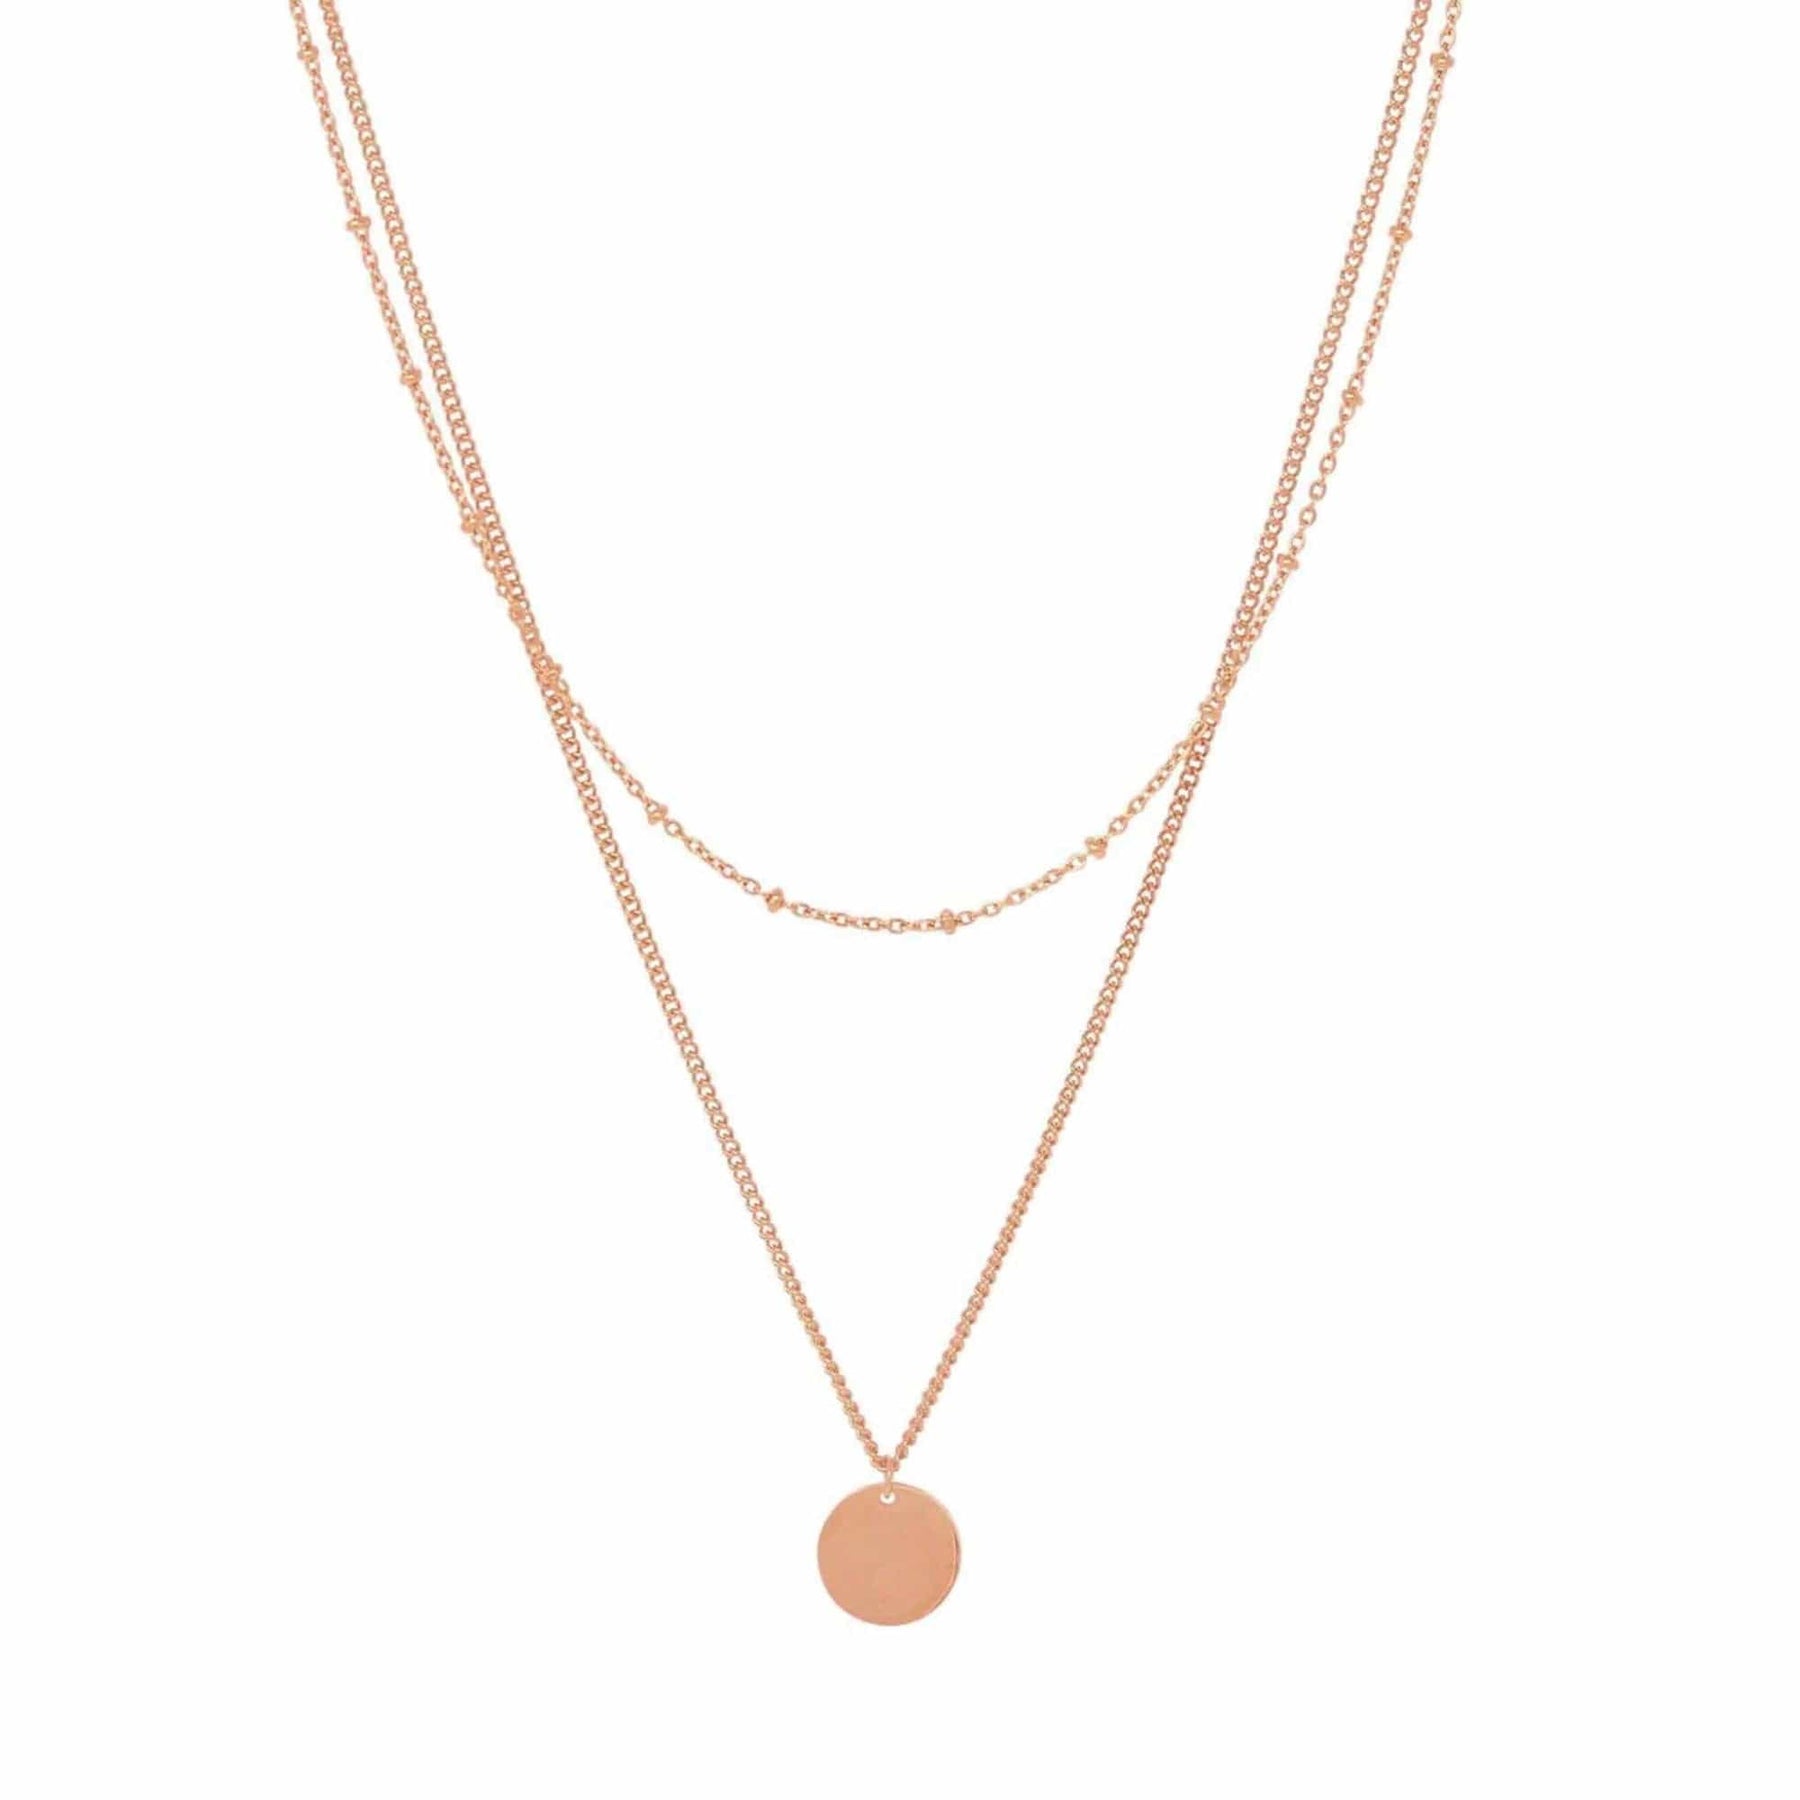 BohoMoon Stainless Steel Contemporary Layered Necklace Rose Gold